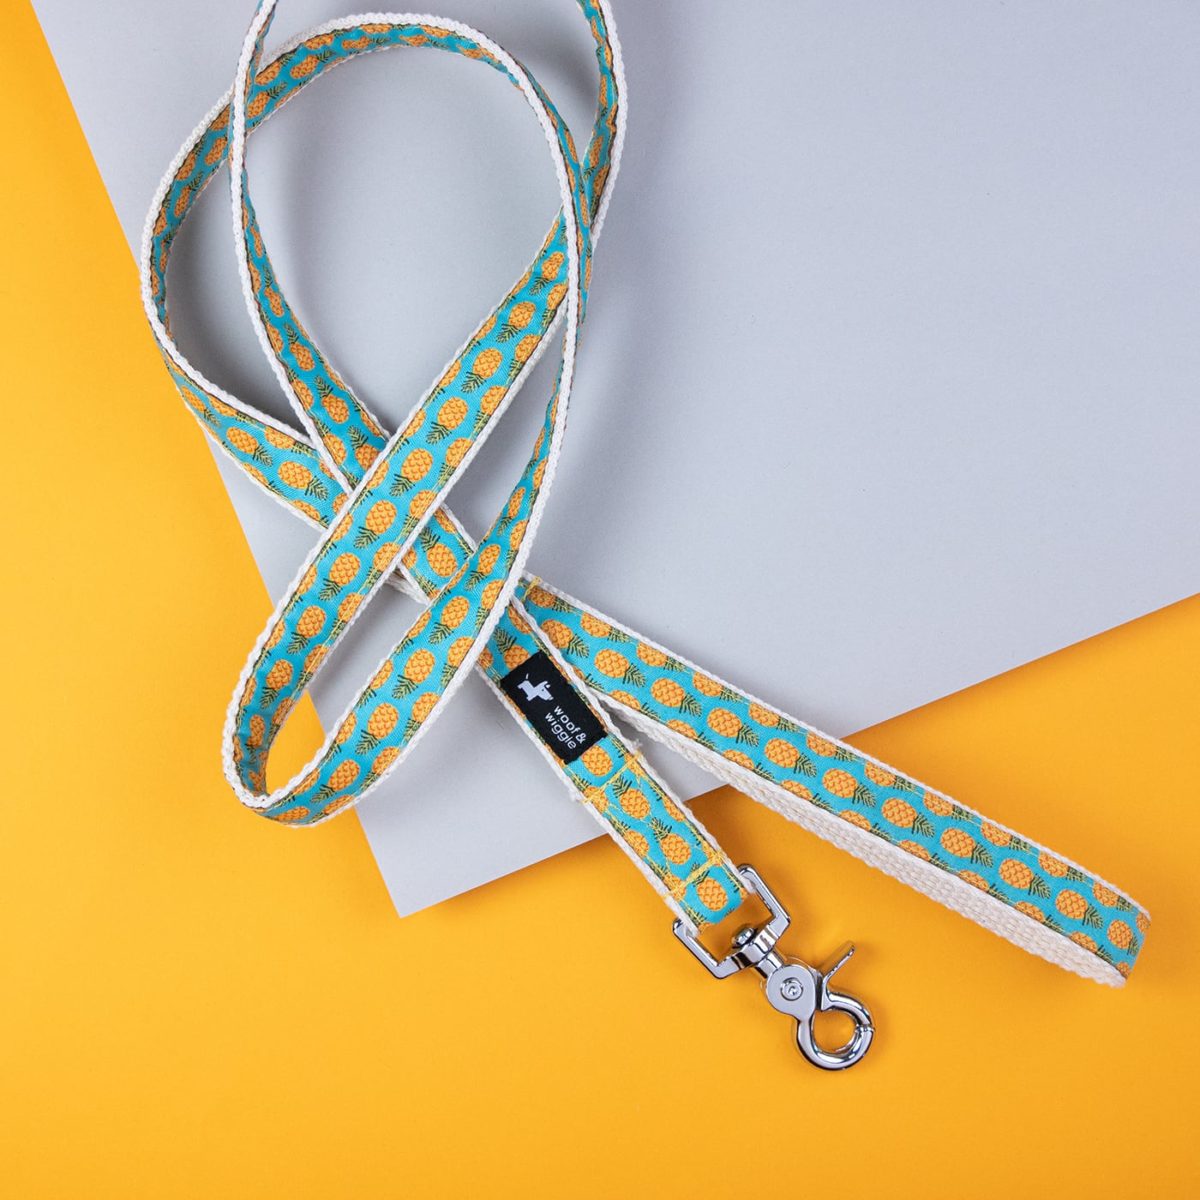 Dog leash with a pineapple design